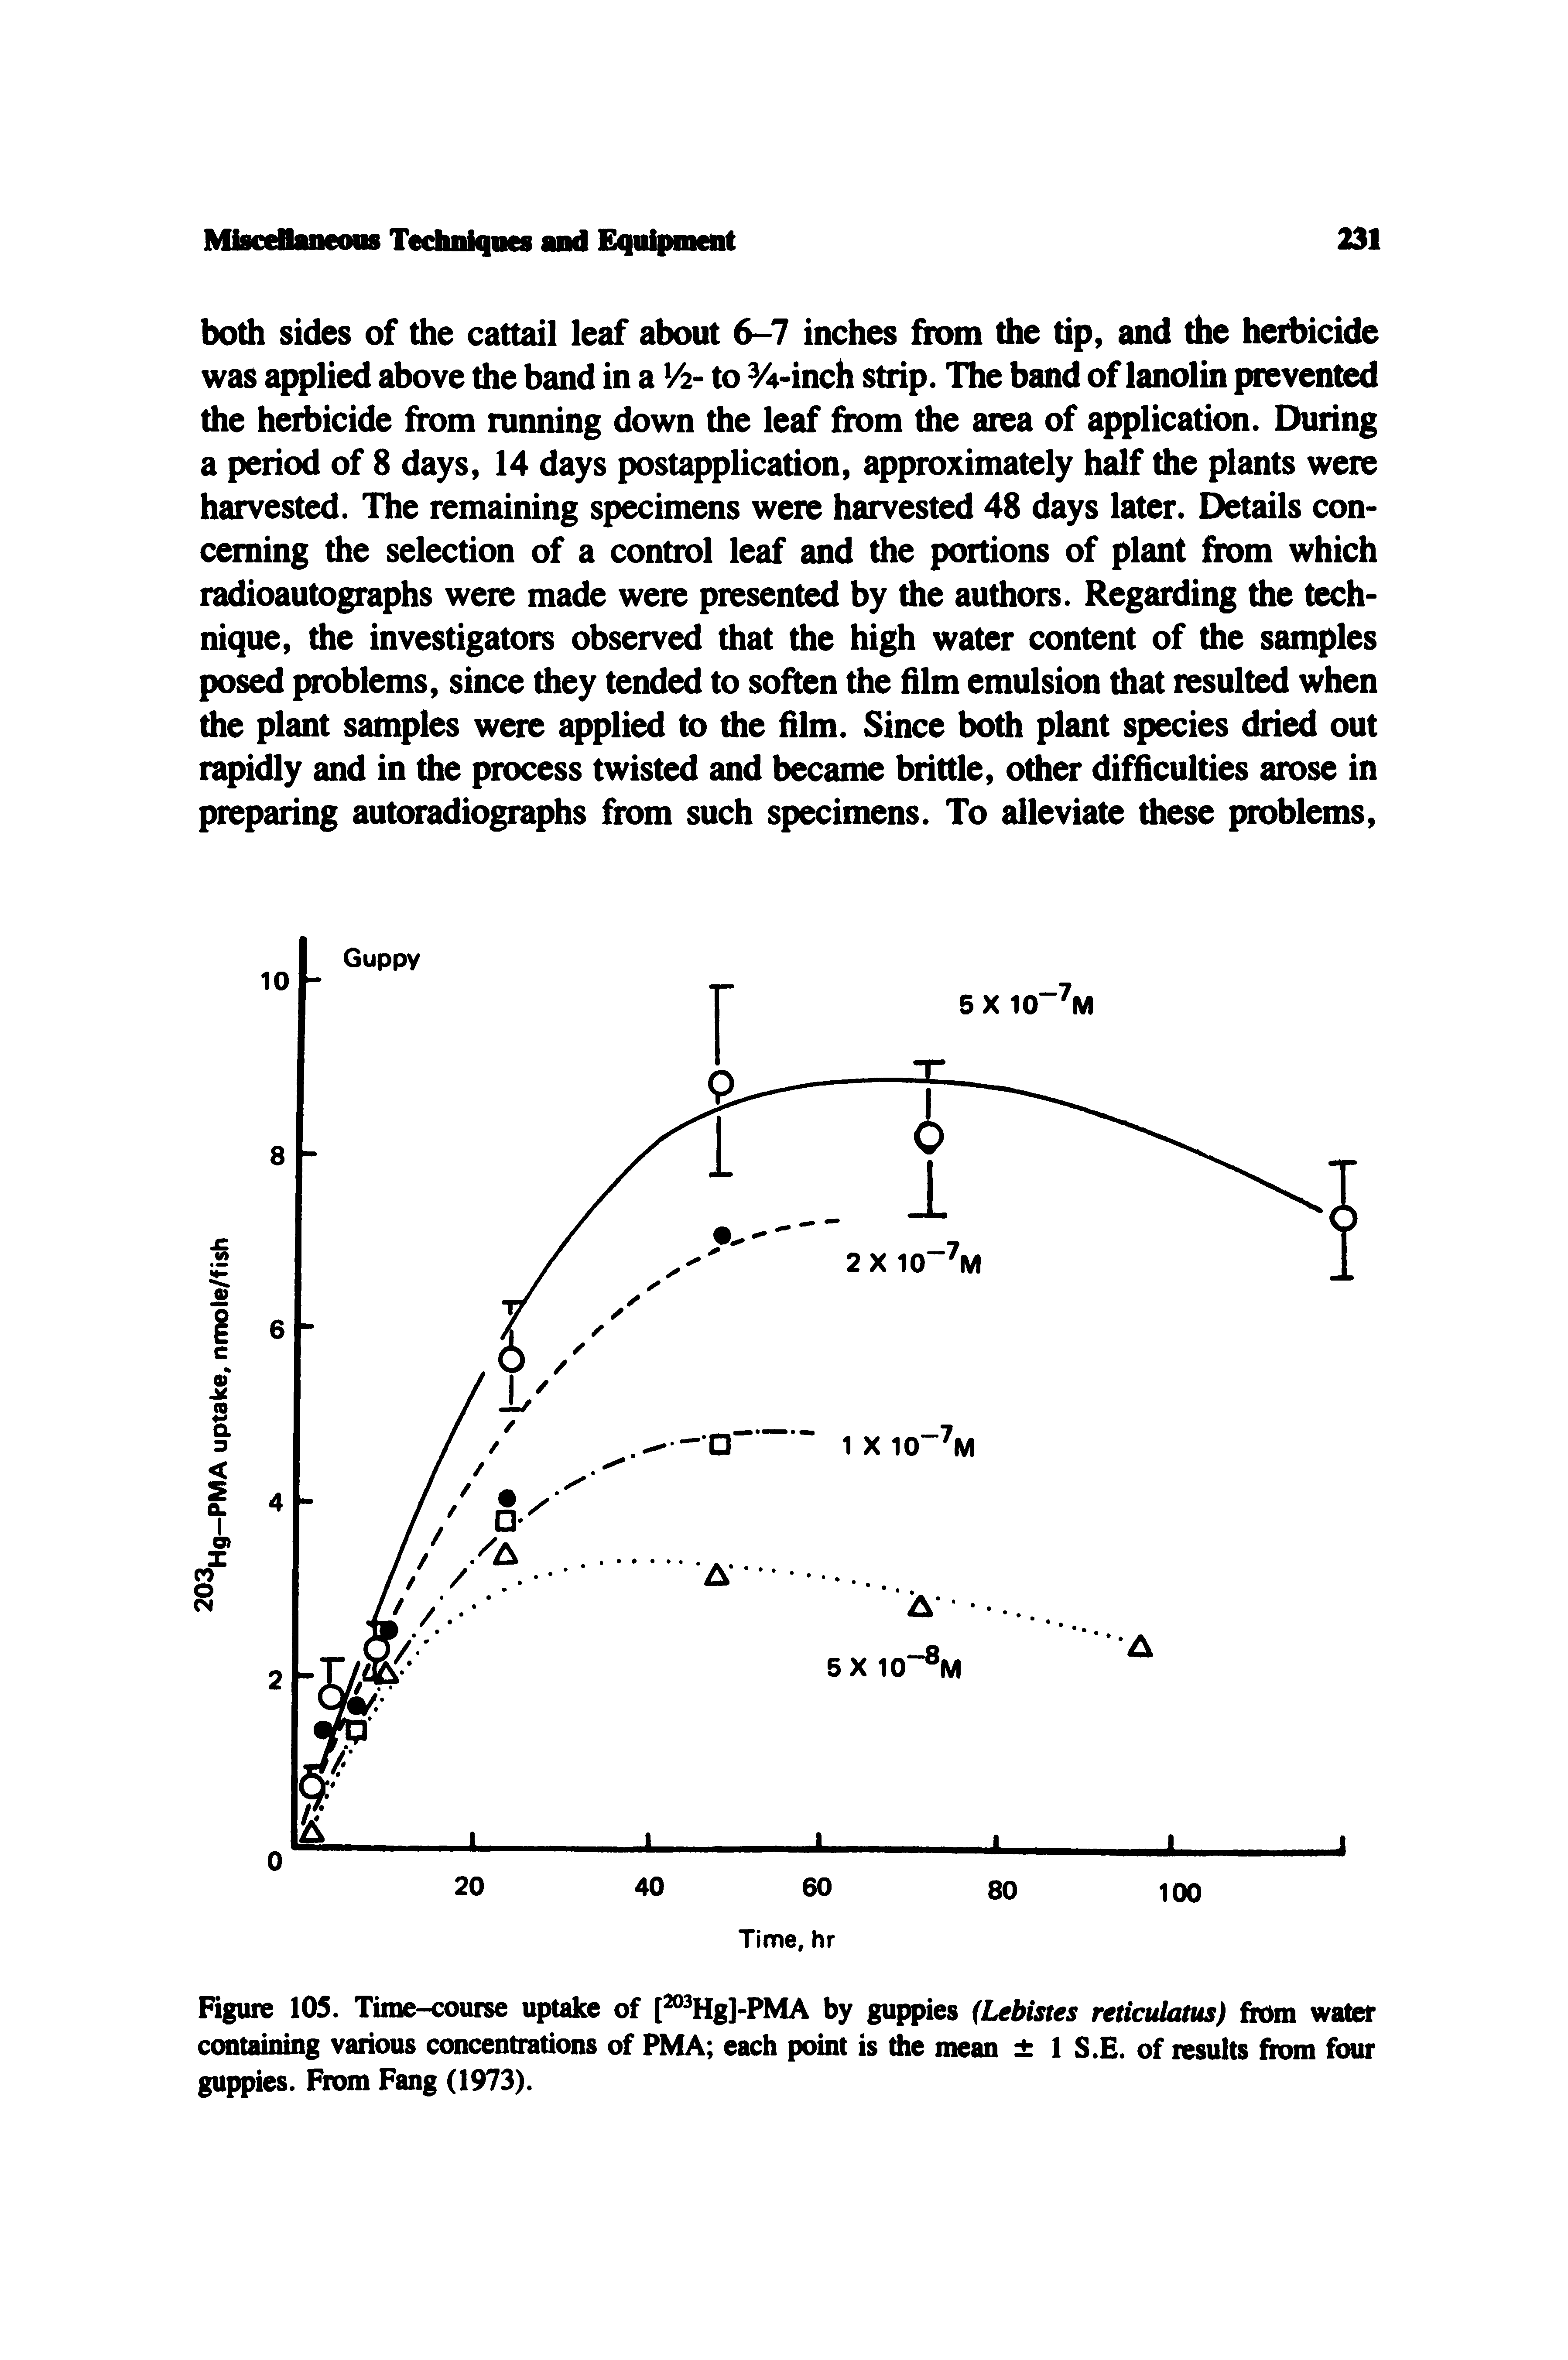 Figure 105. Time-course uptake of [ Hg]-PMA by guppies Lebistes reticulatus) from water containing various concentrations of PMA each point is the mean 1 S.E. of results from four guppies. From Fang (1973).